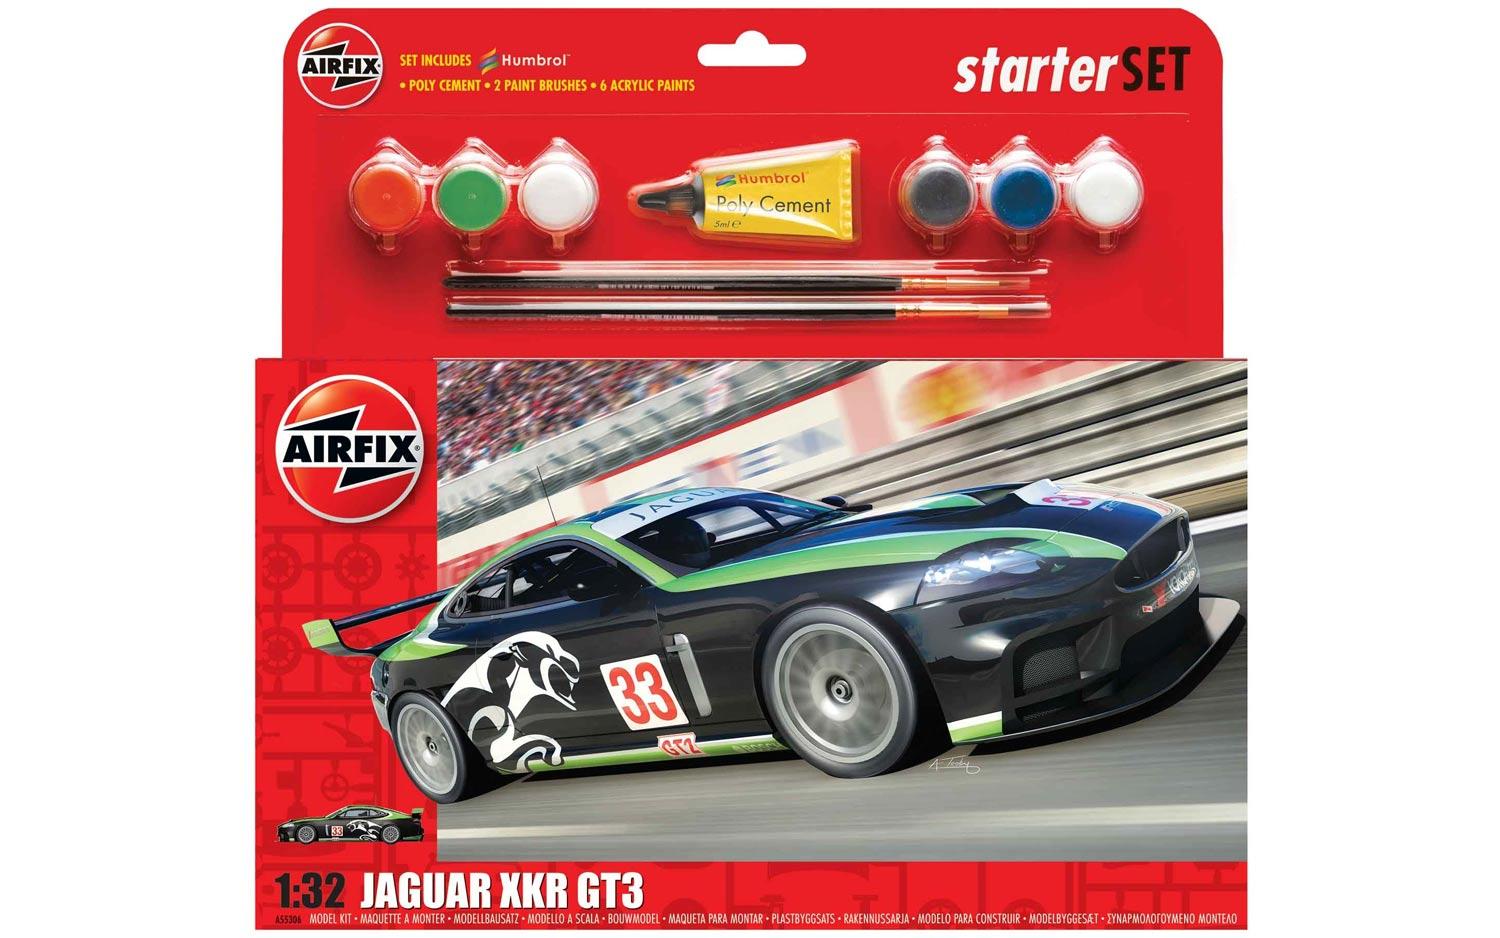 Pack containing model kit for green and black Jaguar XKR GT3 race car.